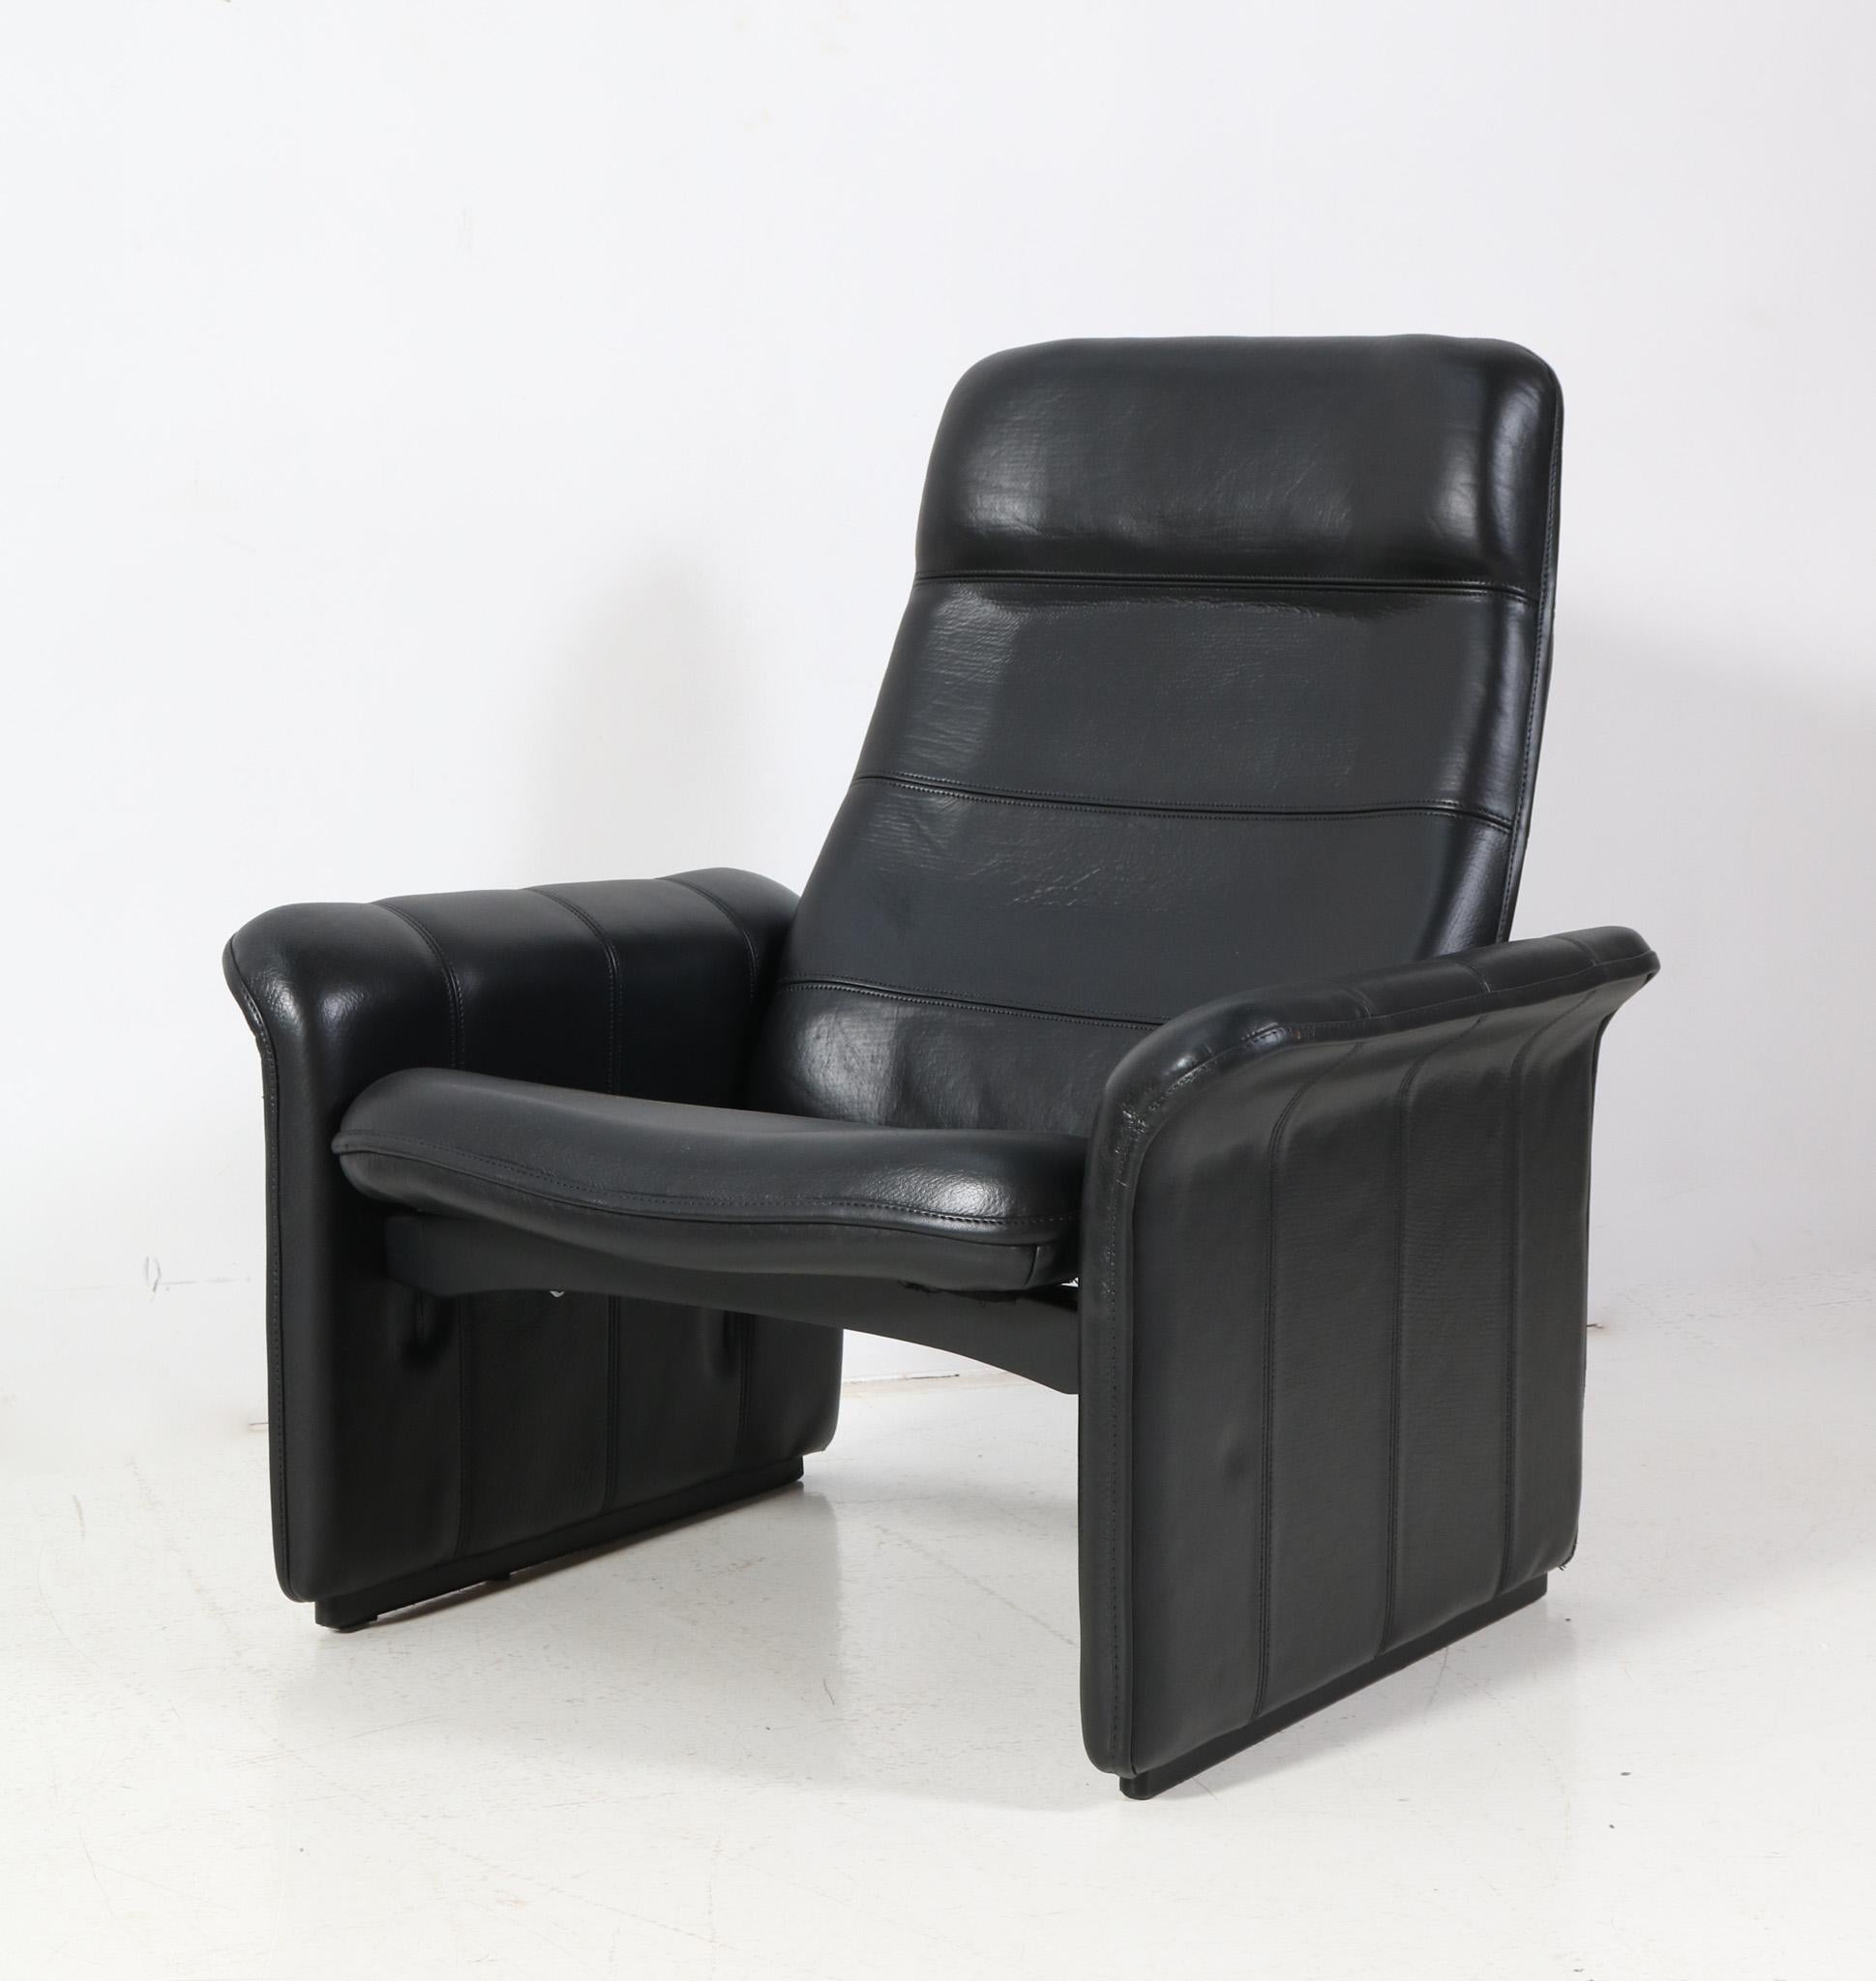 Pair of Buffalo Neck Leather DS-50 Lounge Chairs and Ottoman by De Sede, 1970s For Sale 1